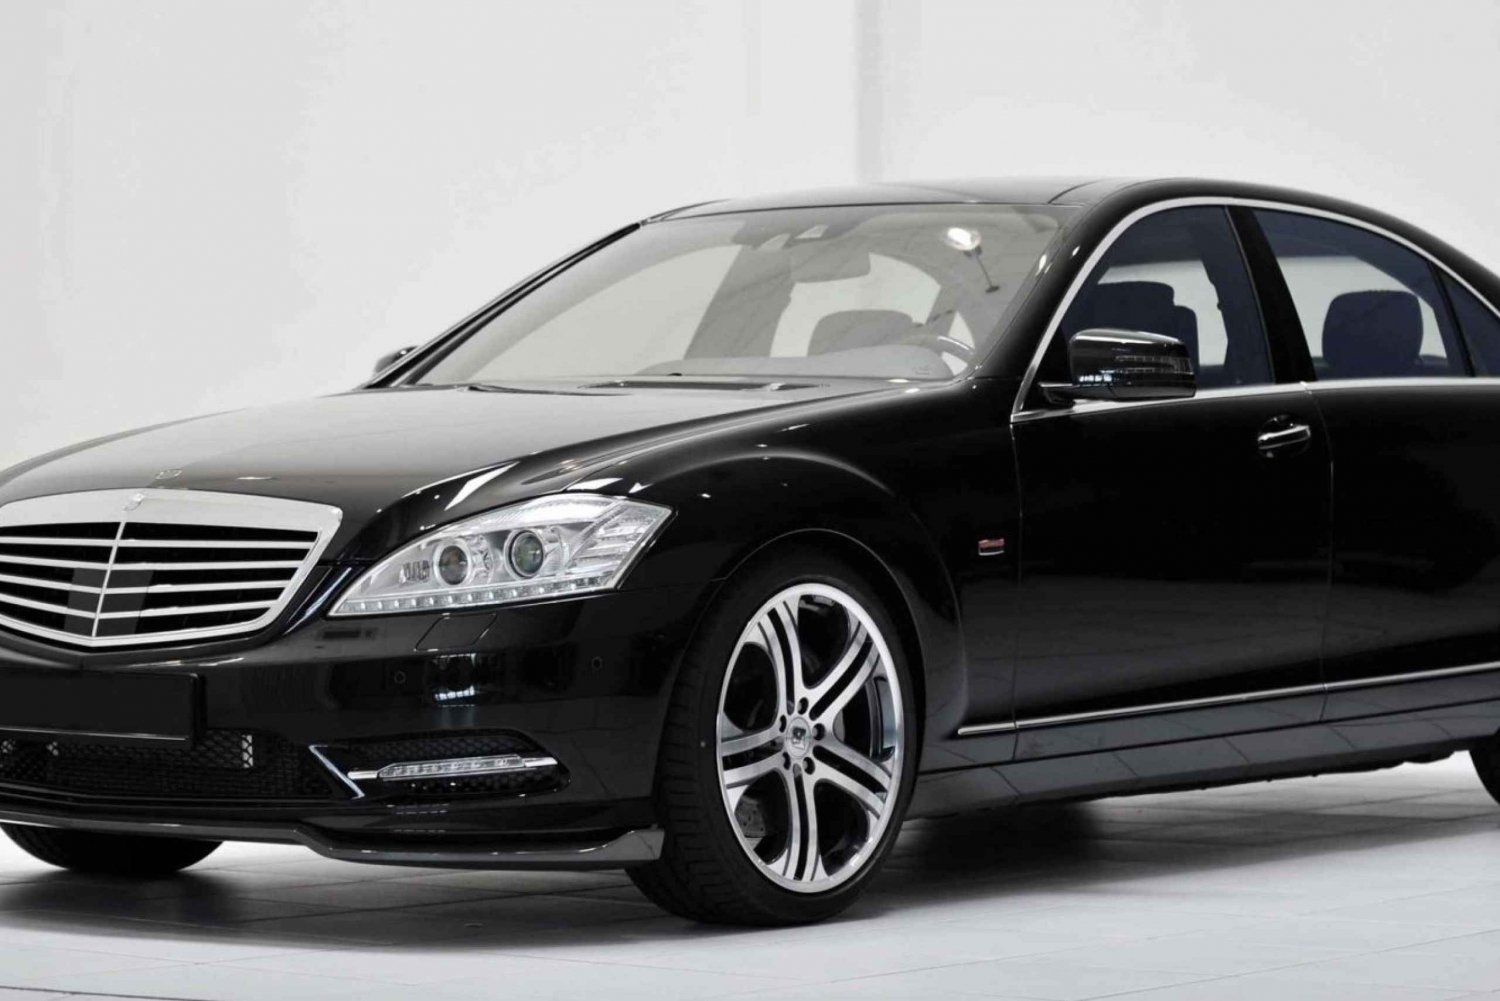 Private transfer to/from hotel from/to airport Copenhagen